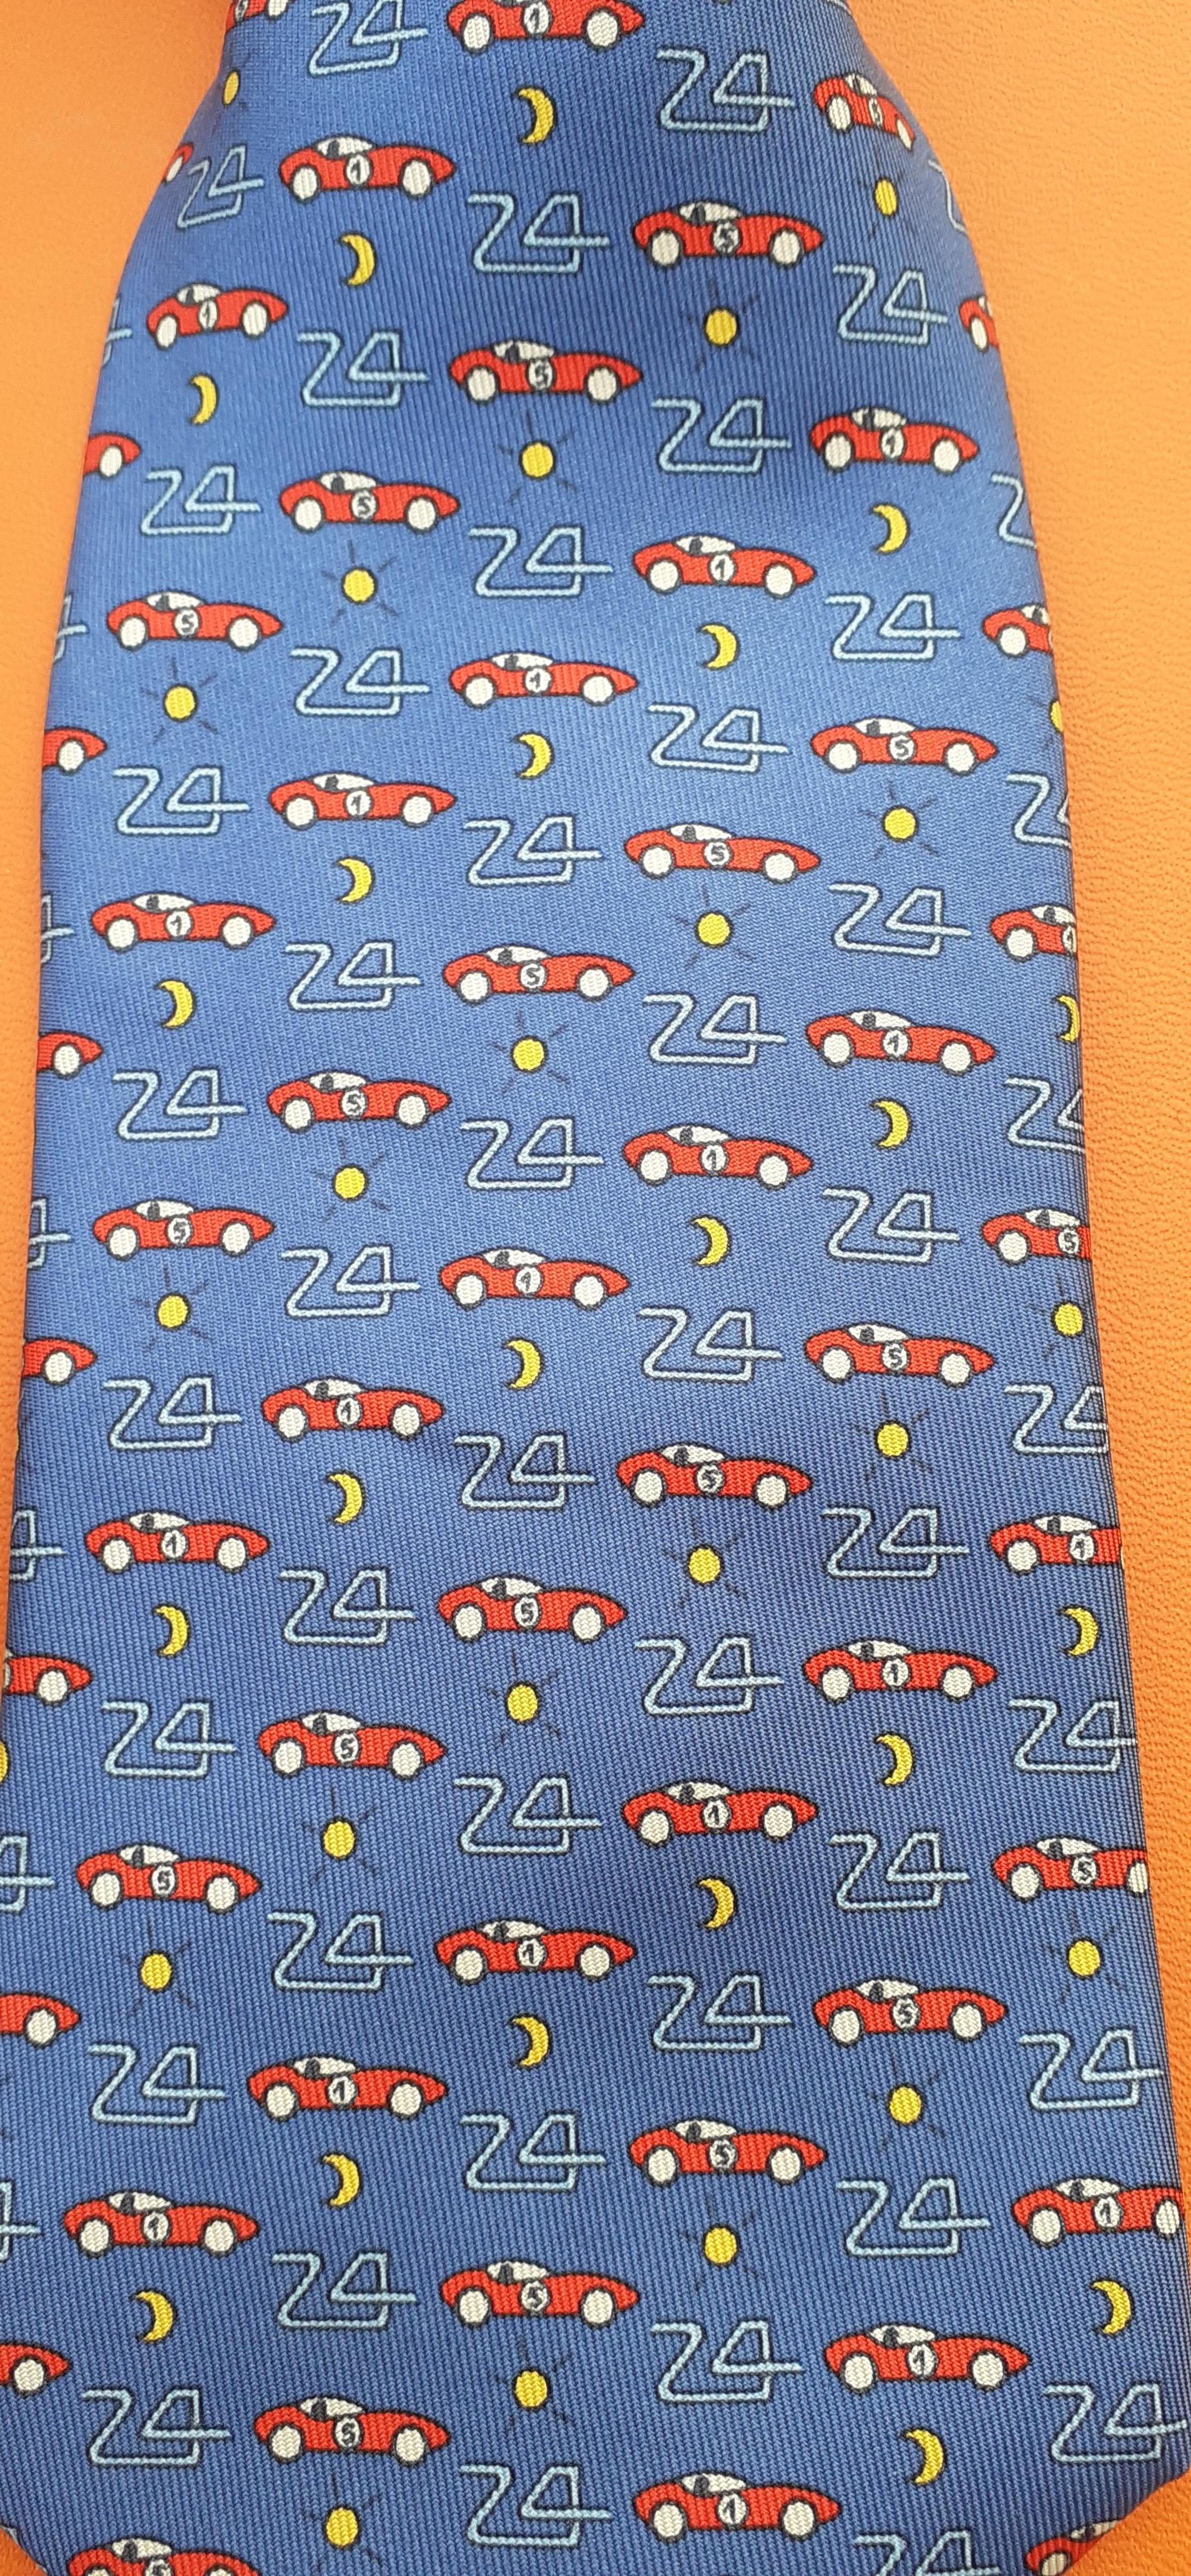 Exceptional Hermès Silk Tie Cars Print For The 24 Hours of Le Mans Race 2